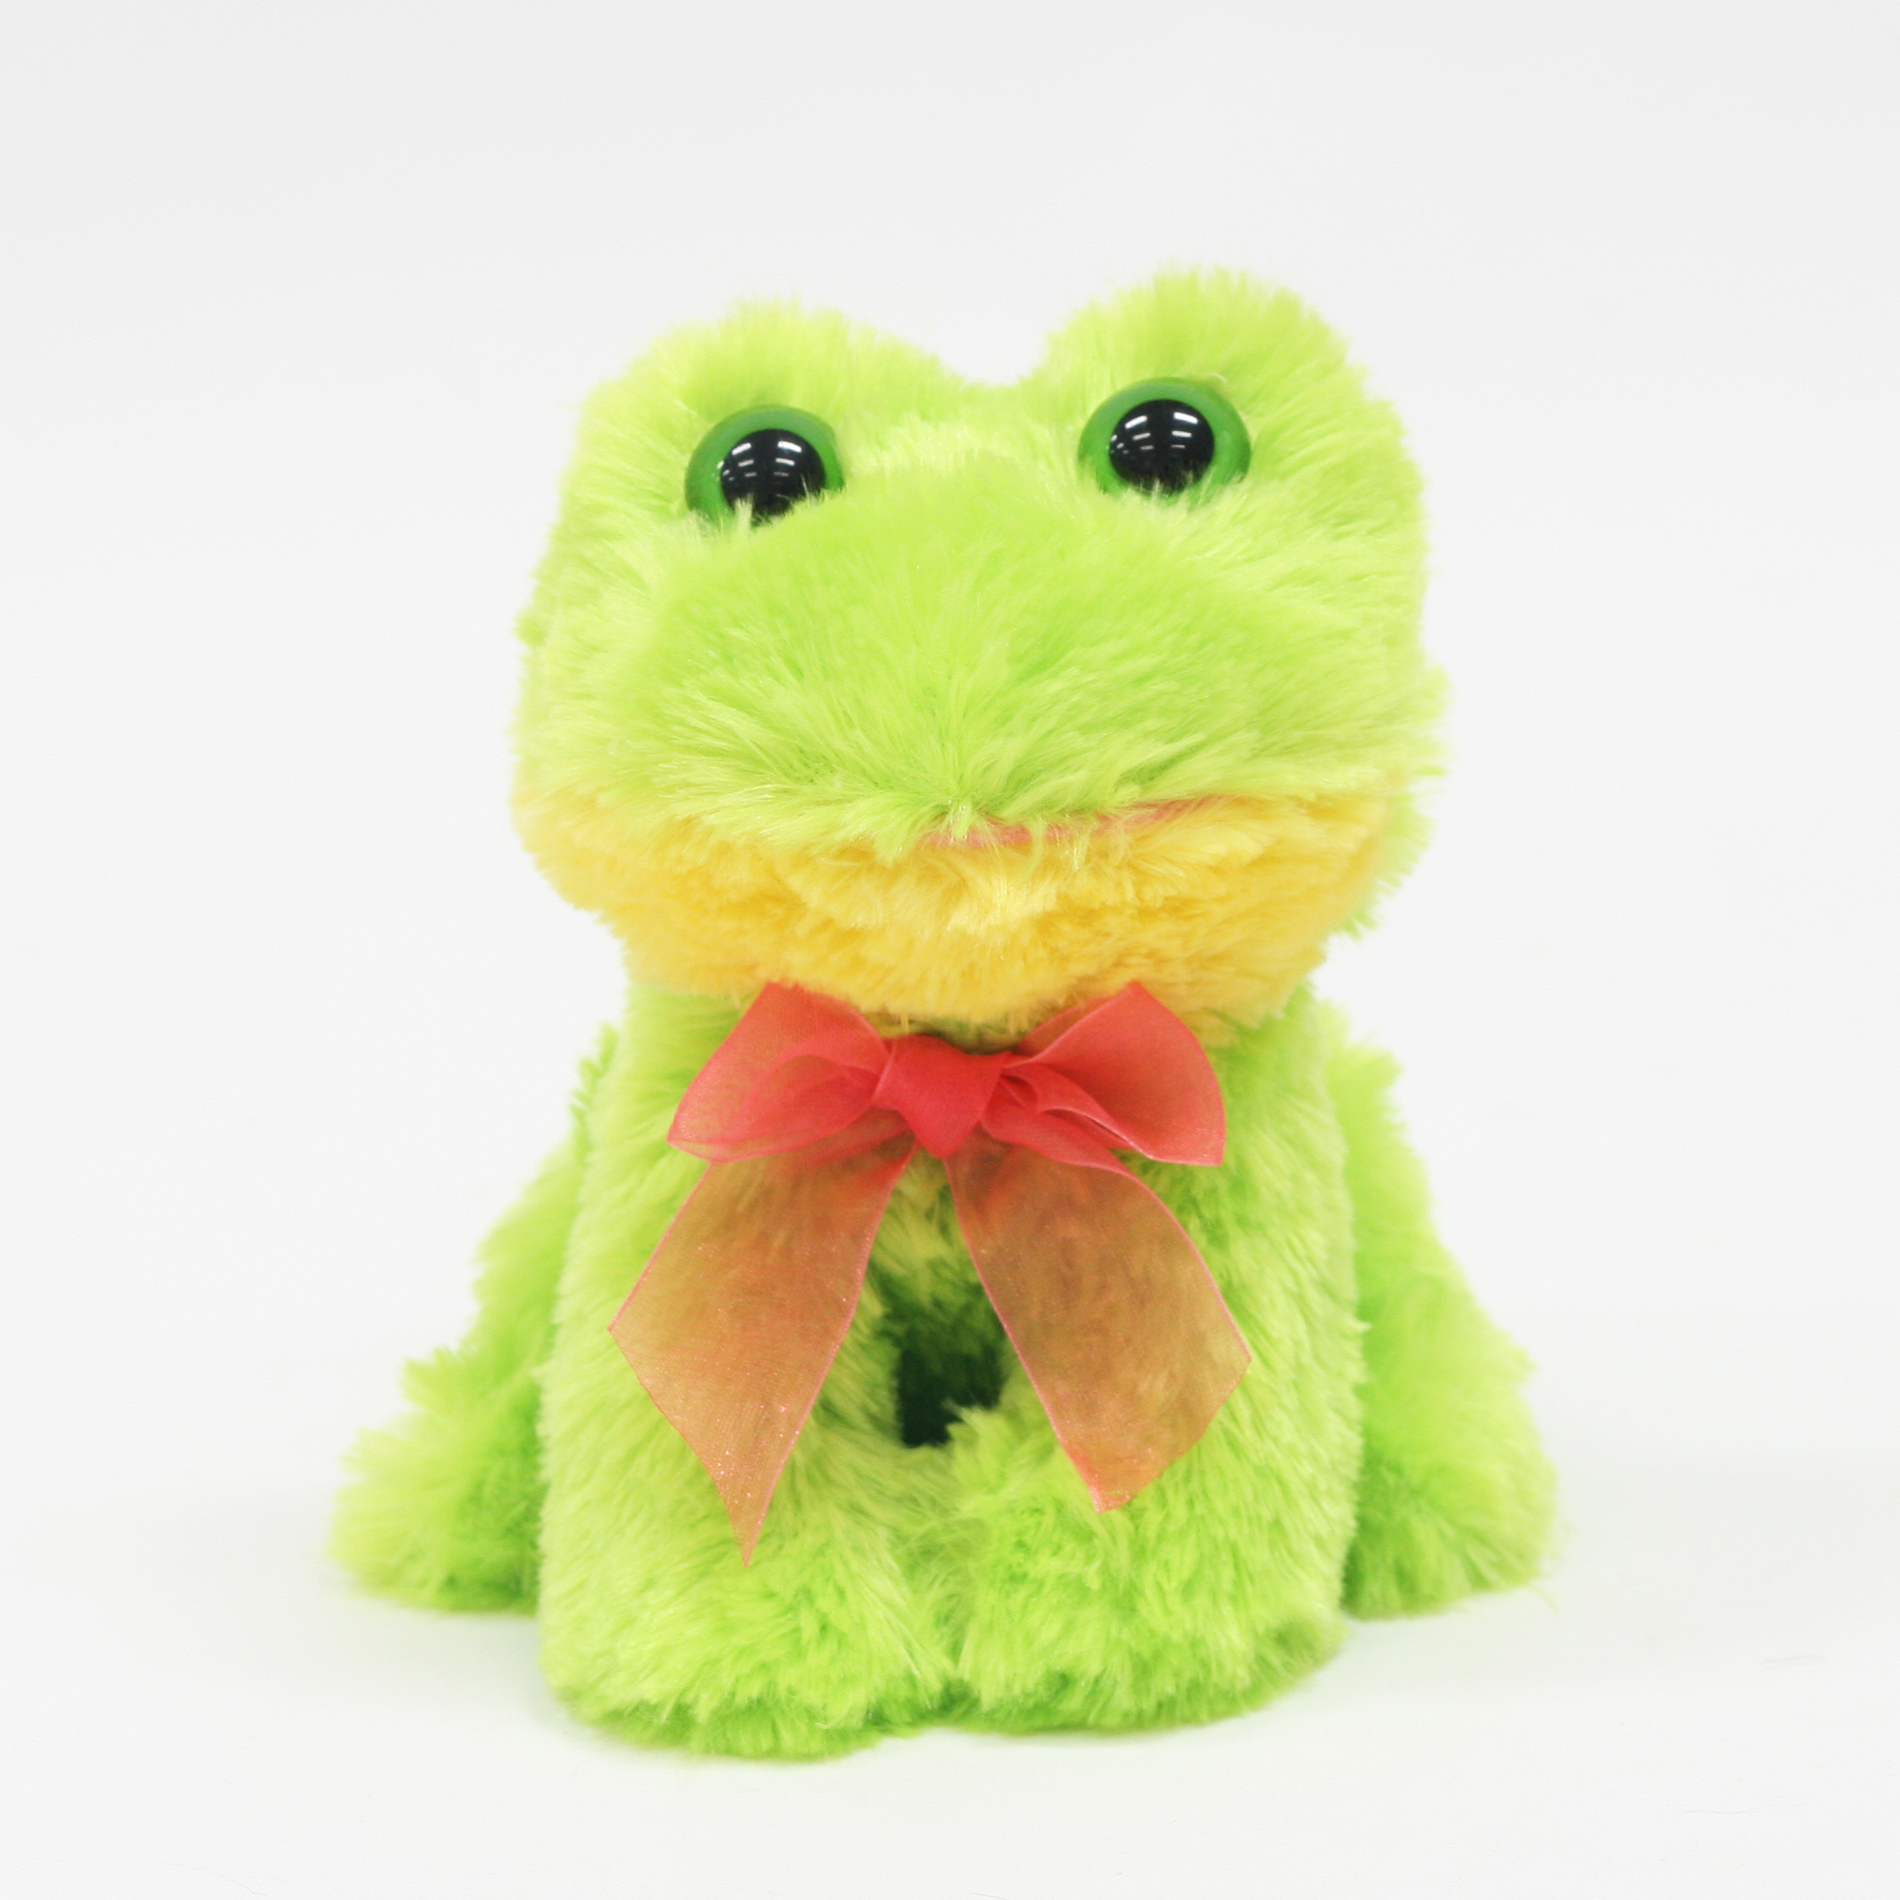 Easter Jubilee 7.5" Mini Plush Frog - Soft and Fluffy